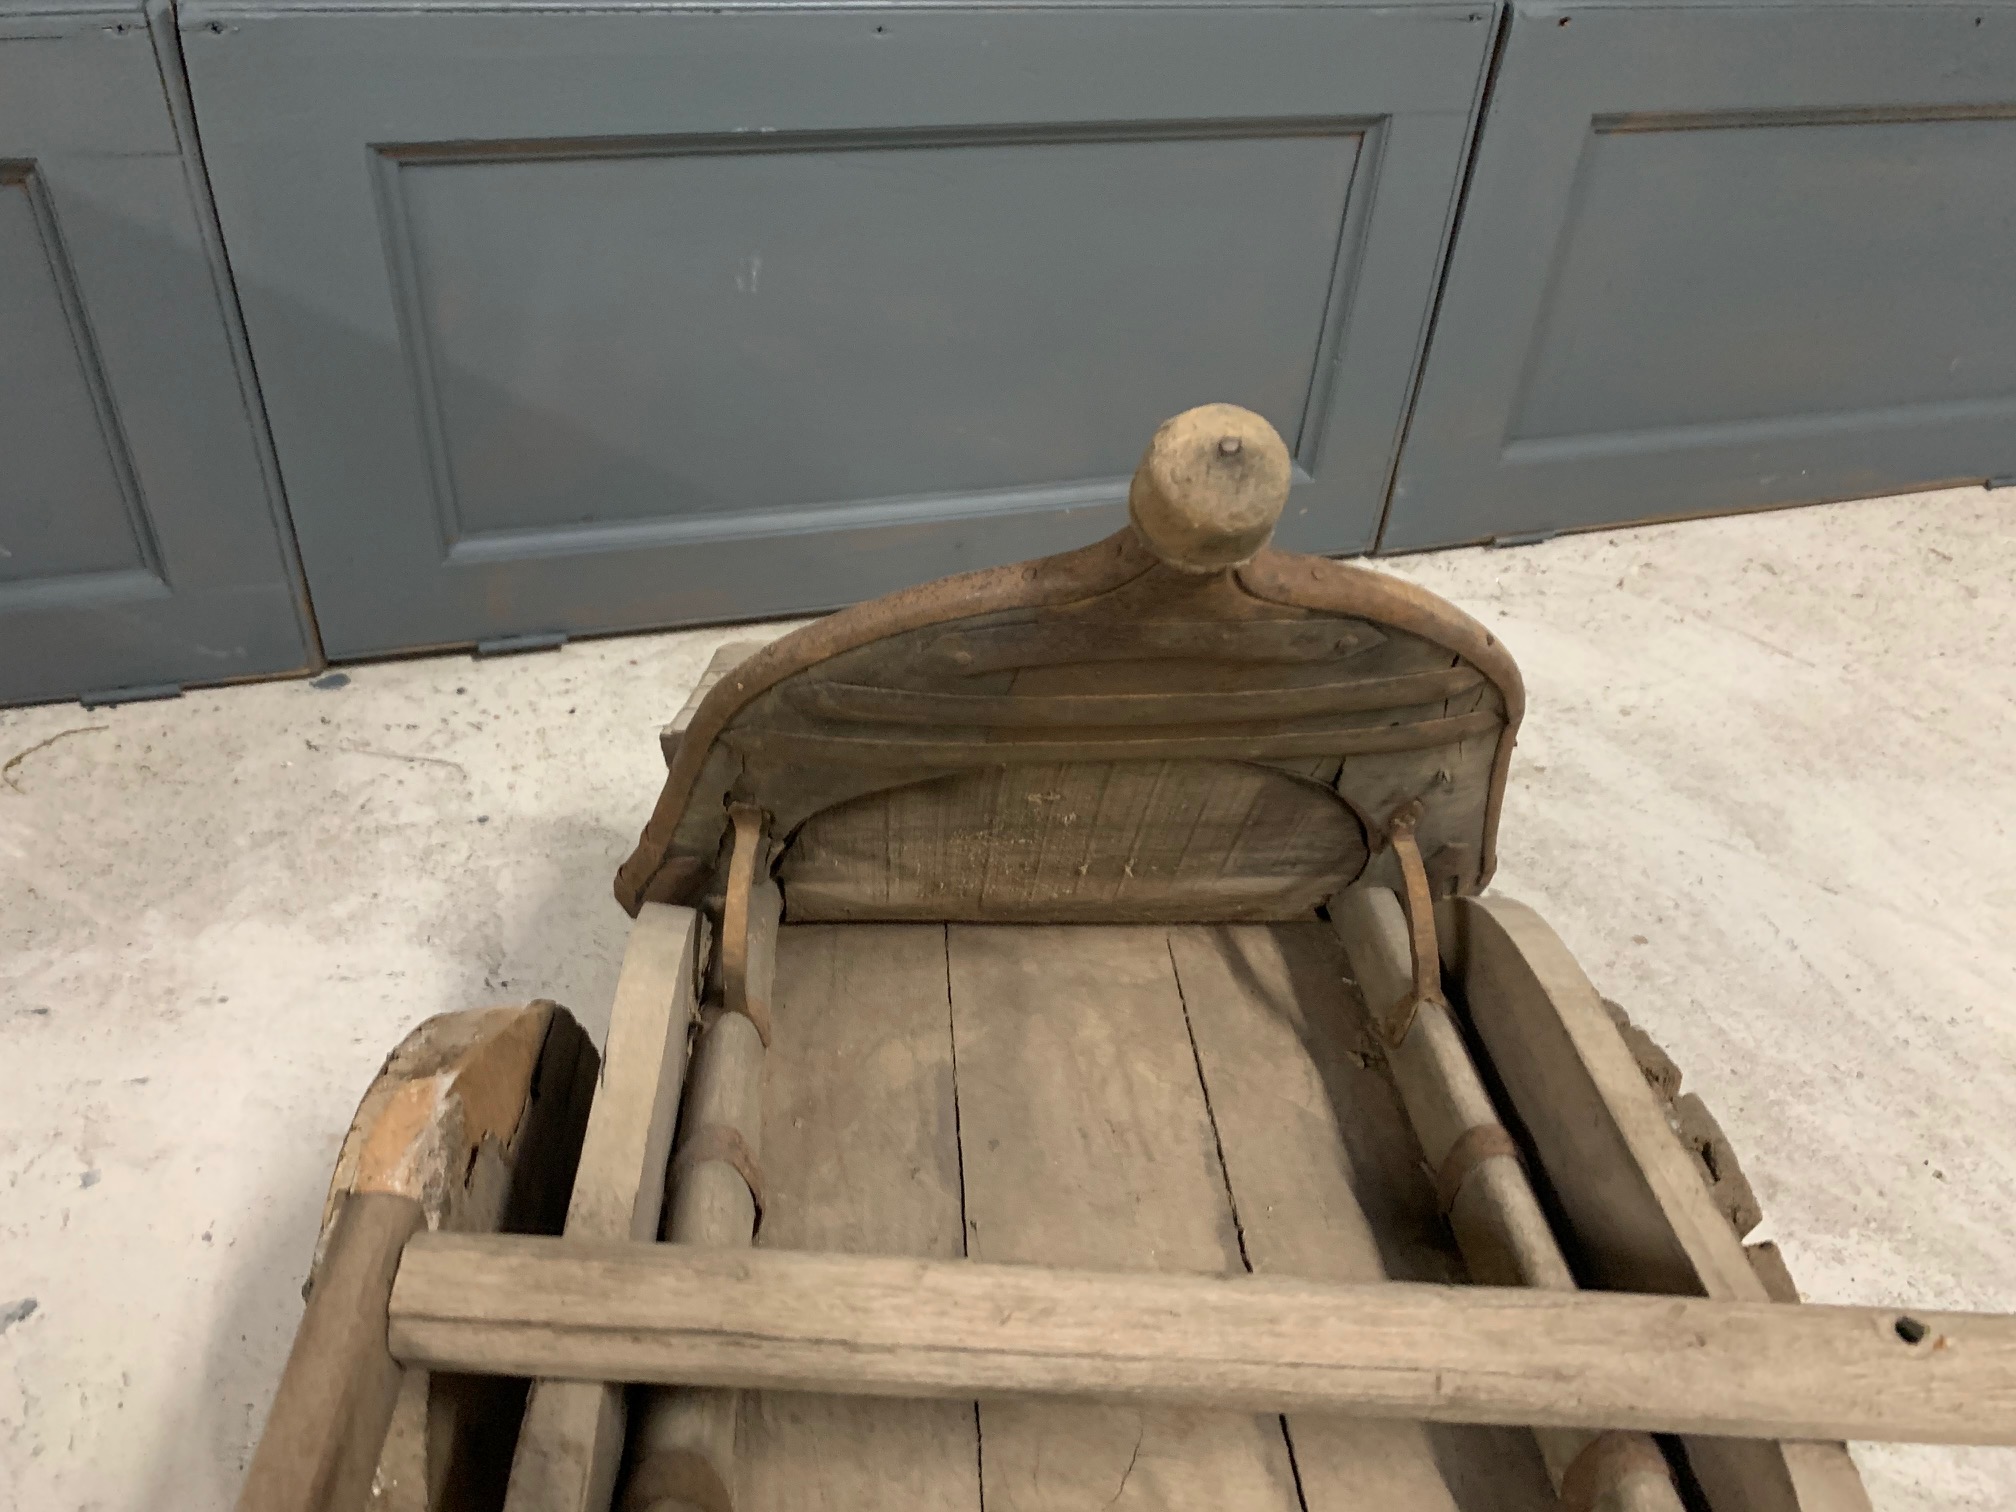 Antique Wooden Indian Childs Go Cart - Image 6 of 6